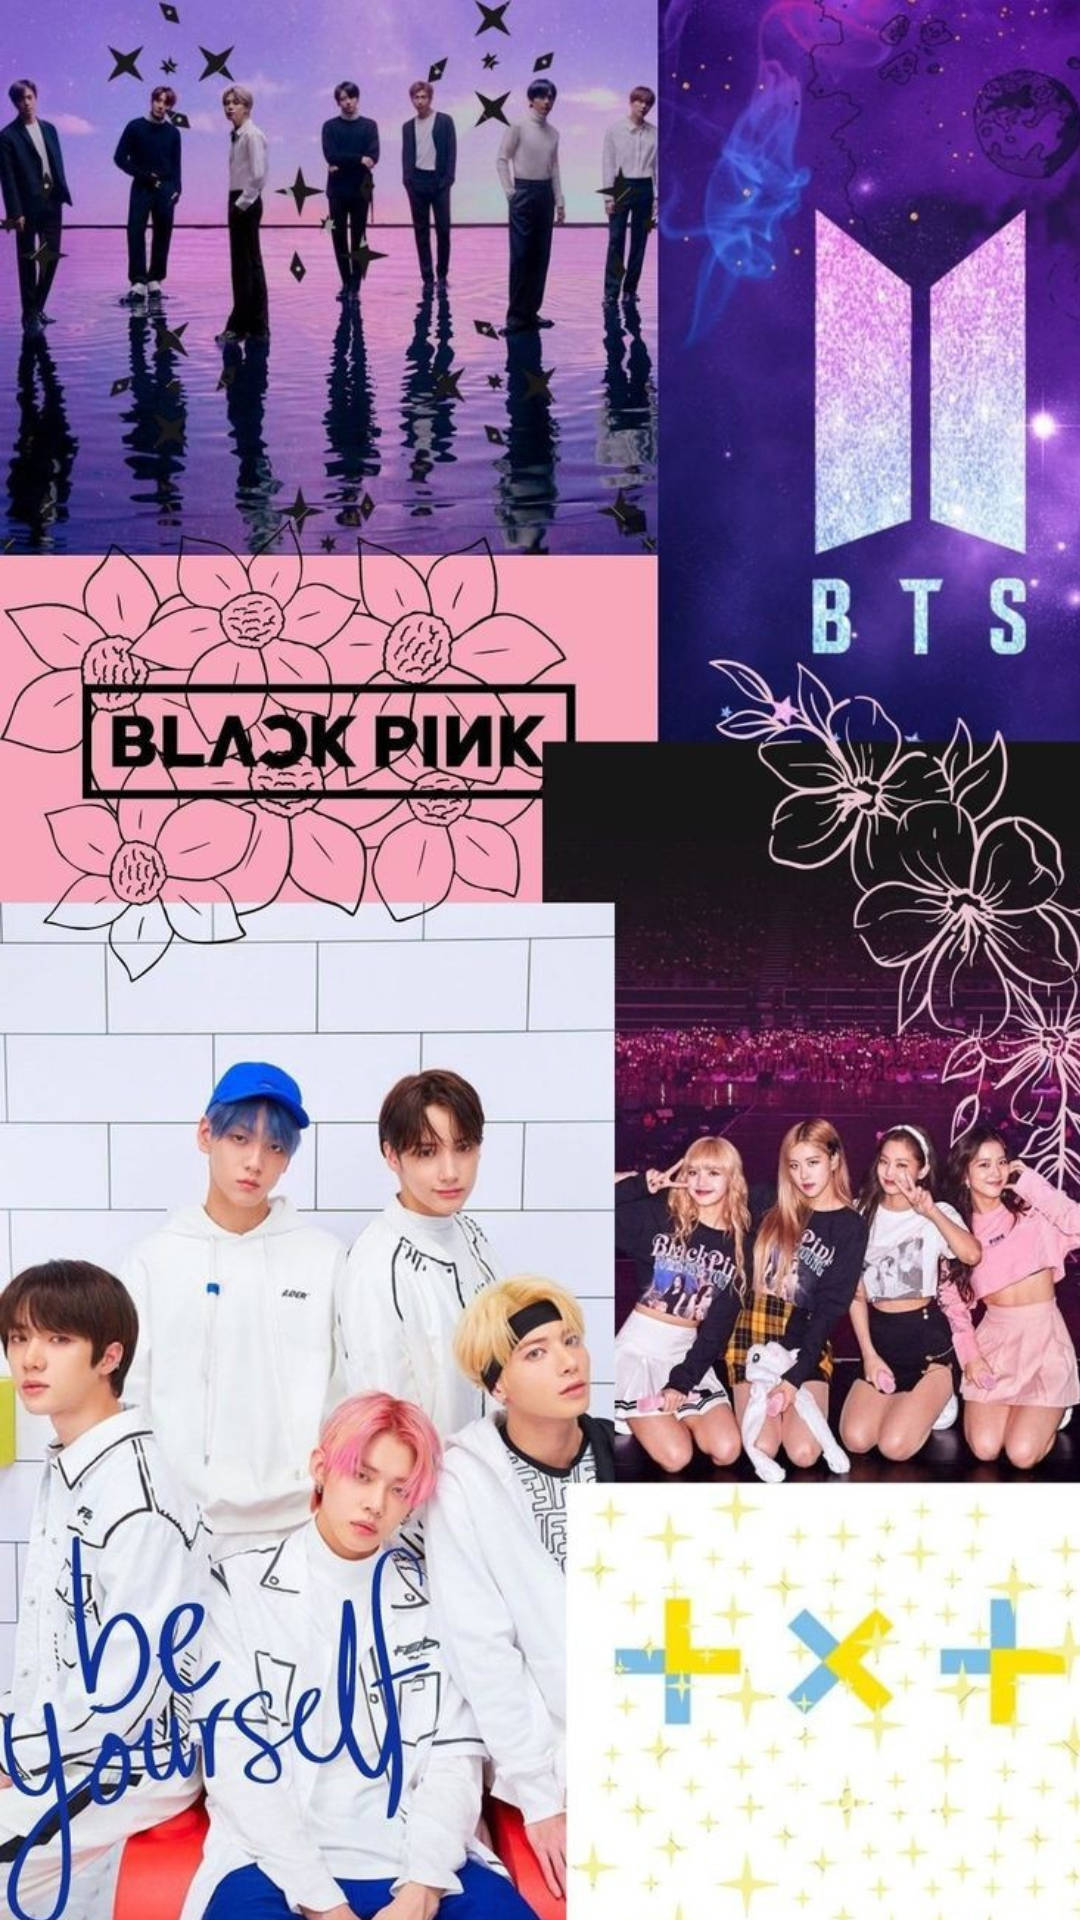 Download Txt With Bts And Blackpink Wallpaper | Wallpapers.com